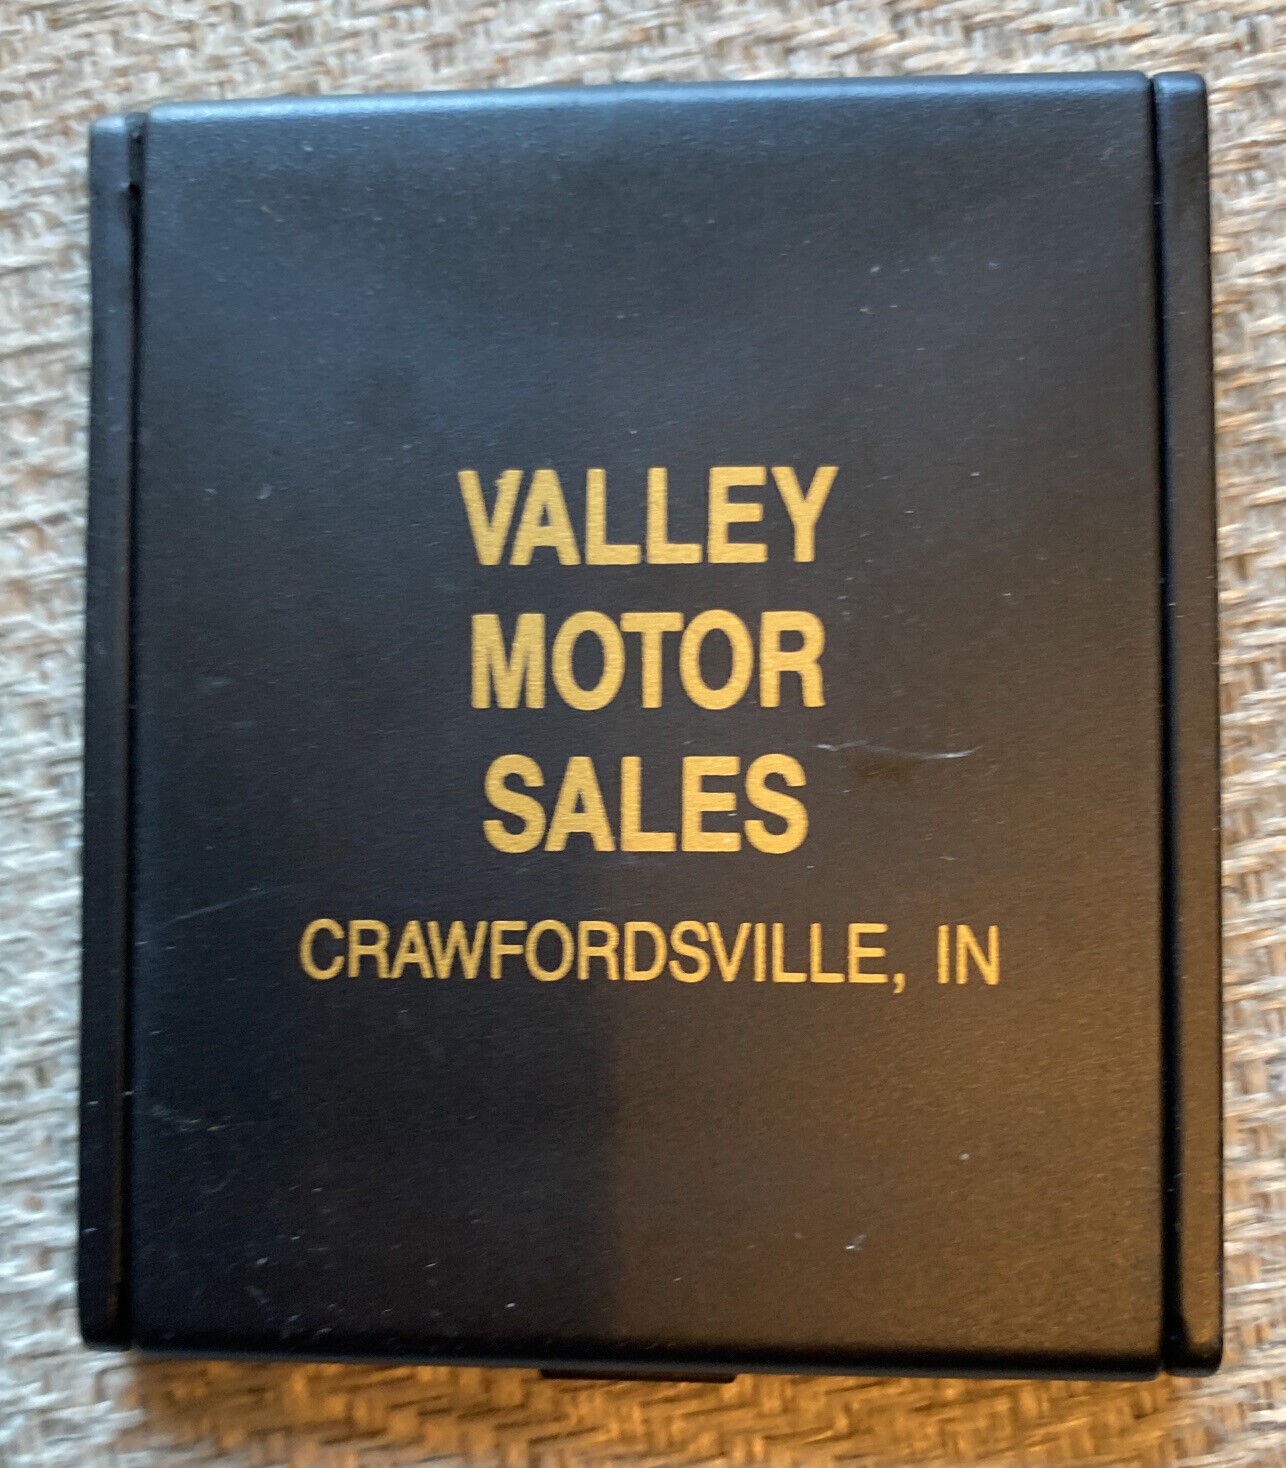 Crawfordsville Indiana Valley Motor Sales Advertising Mirror Chevy Ford In